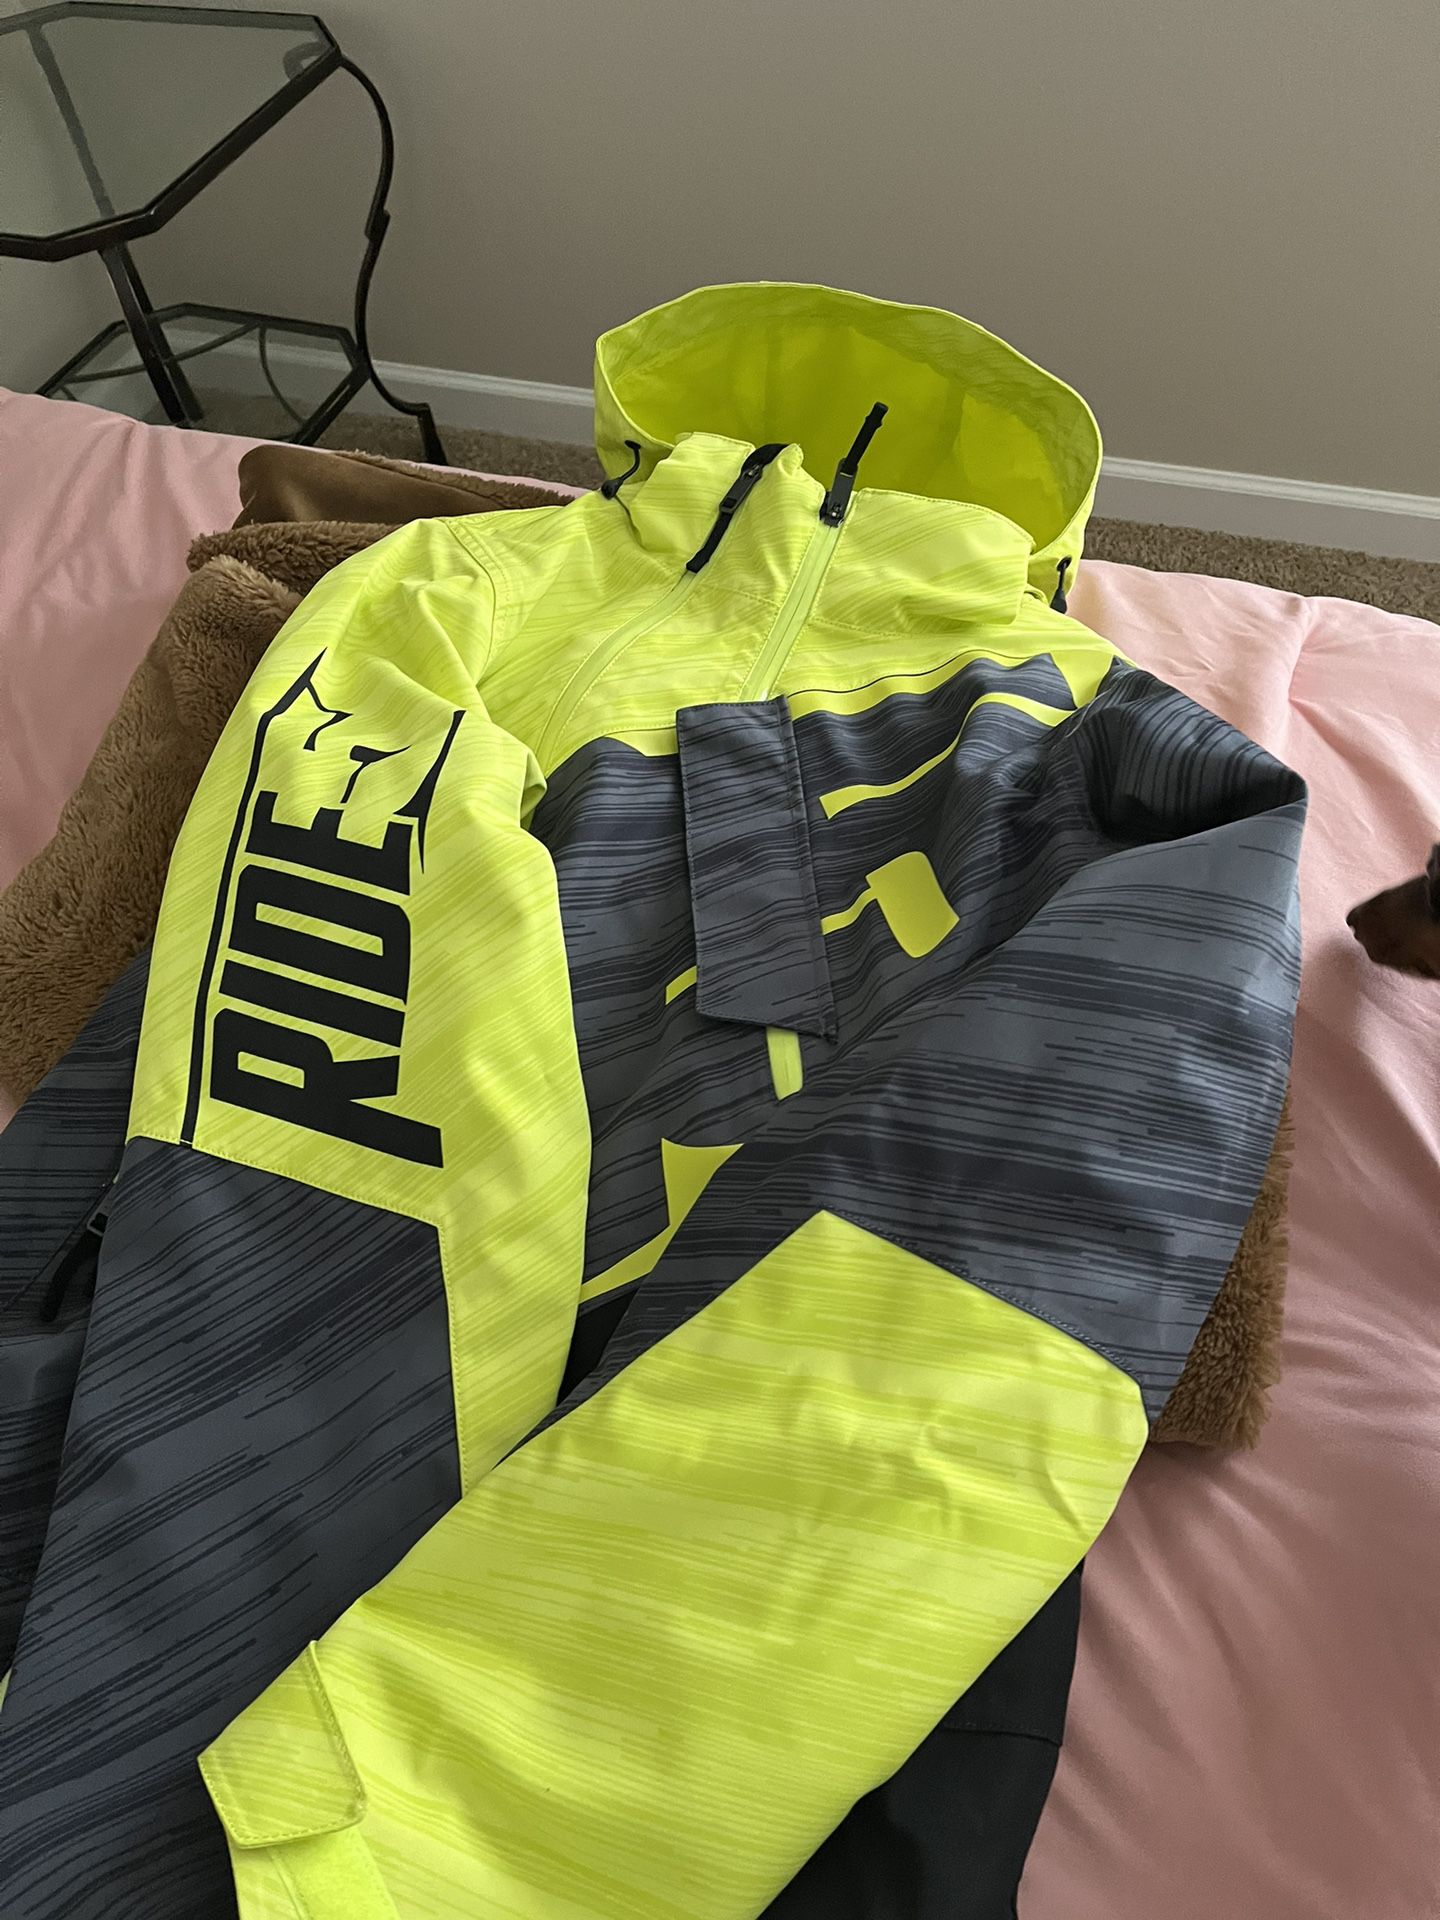 Brand New Snowmobile Or Ski/snowboard Suit  